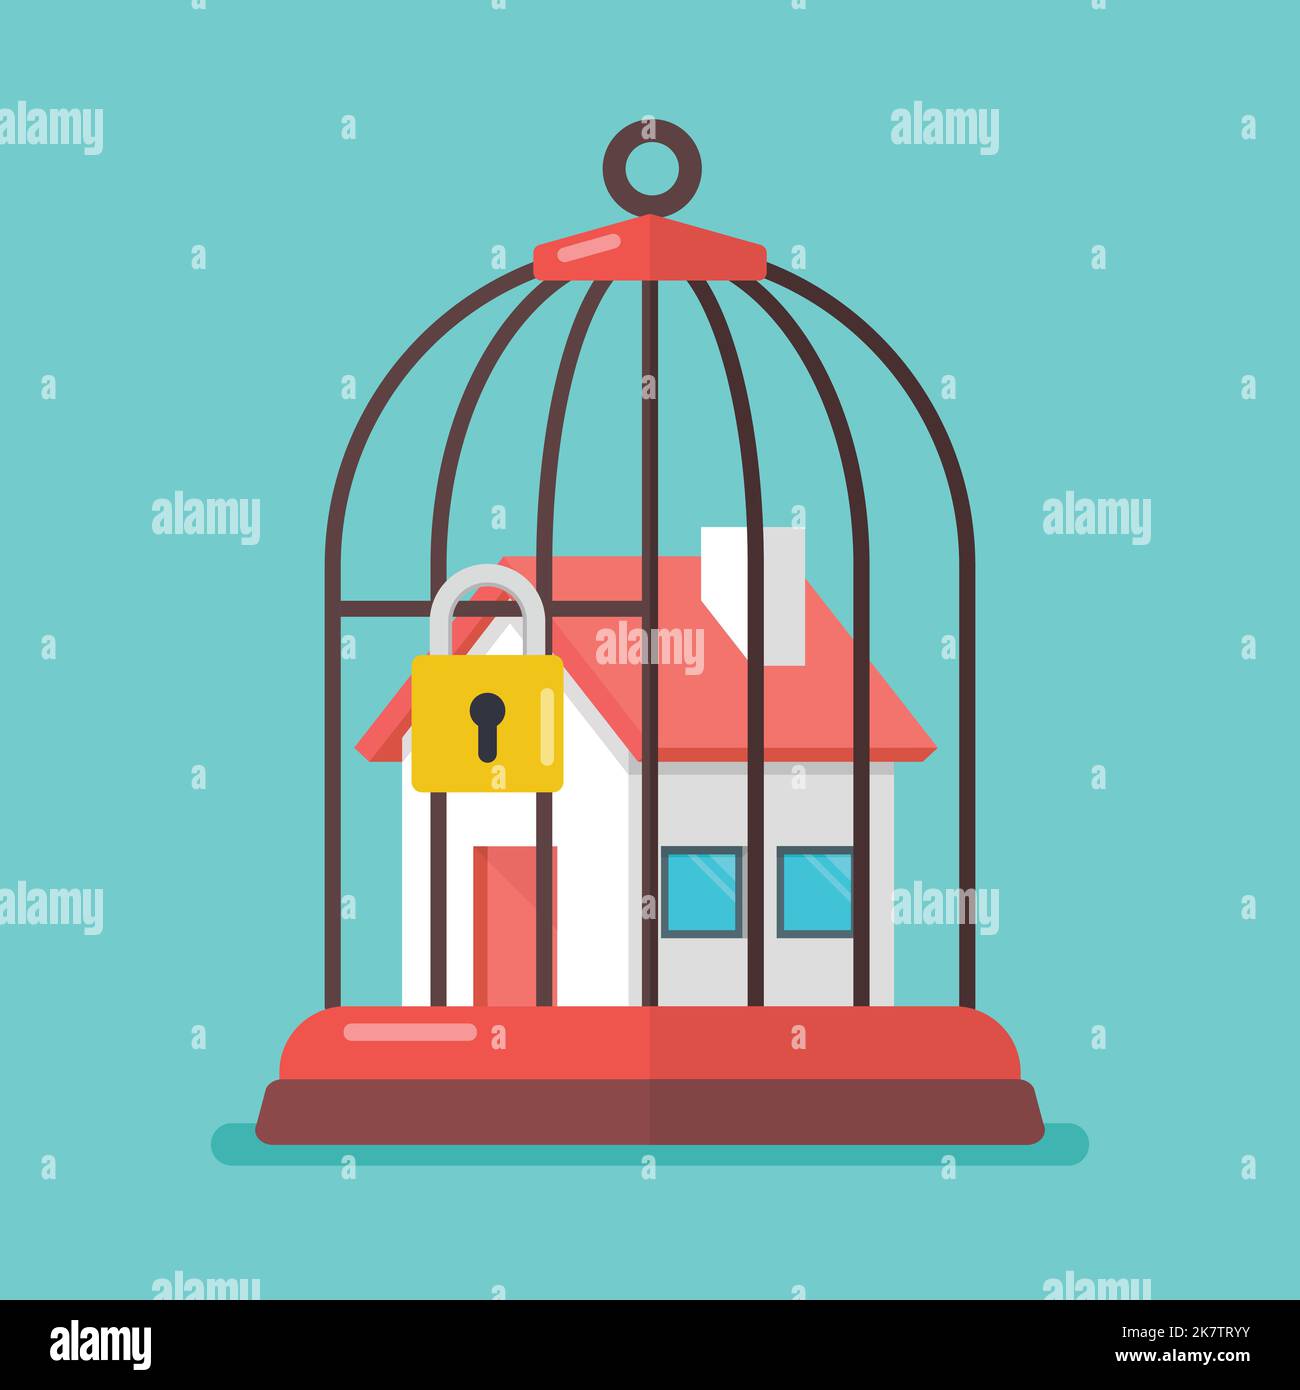 Locked house inside the cage. Real estate business concept. vector illustration Stock Vector